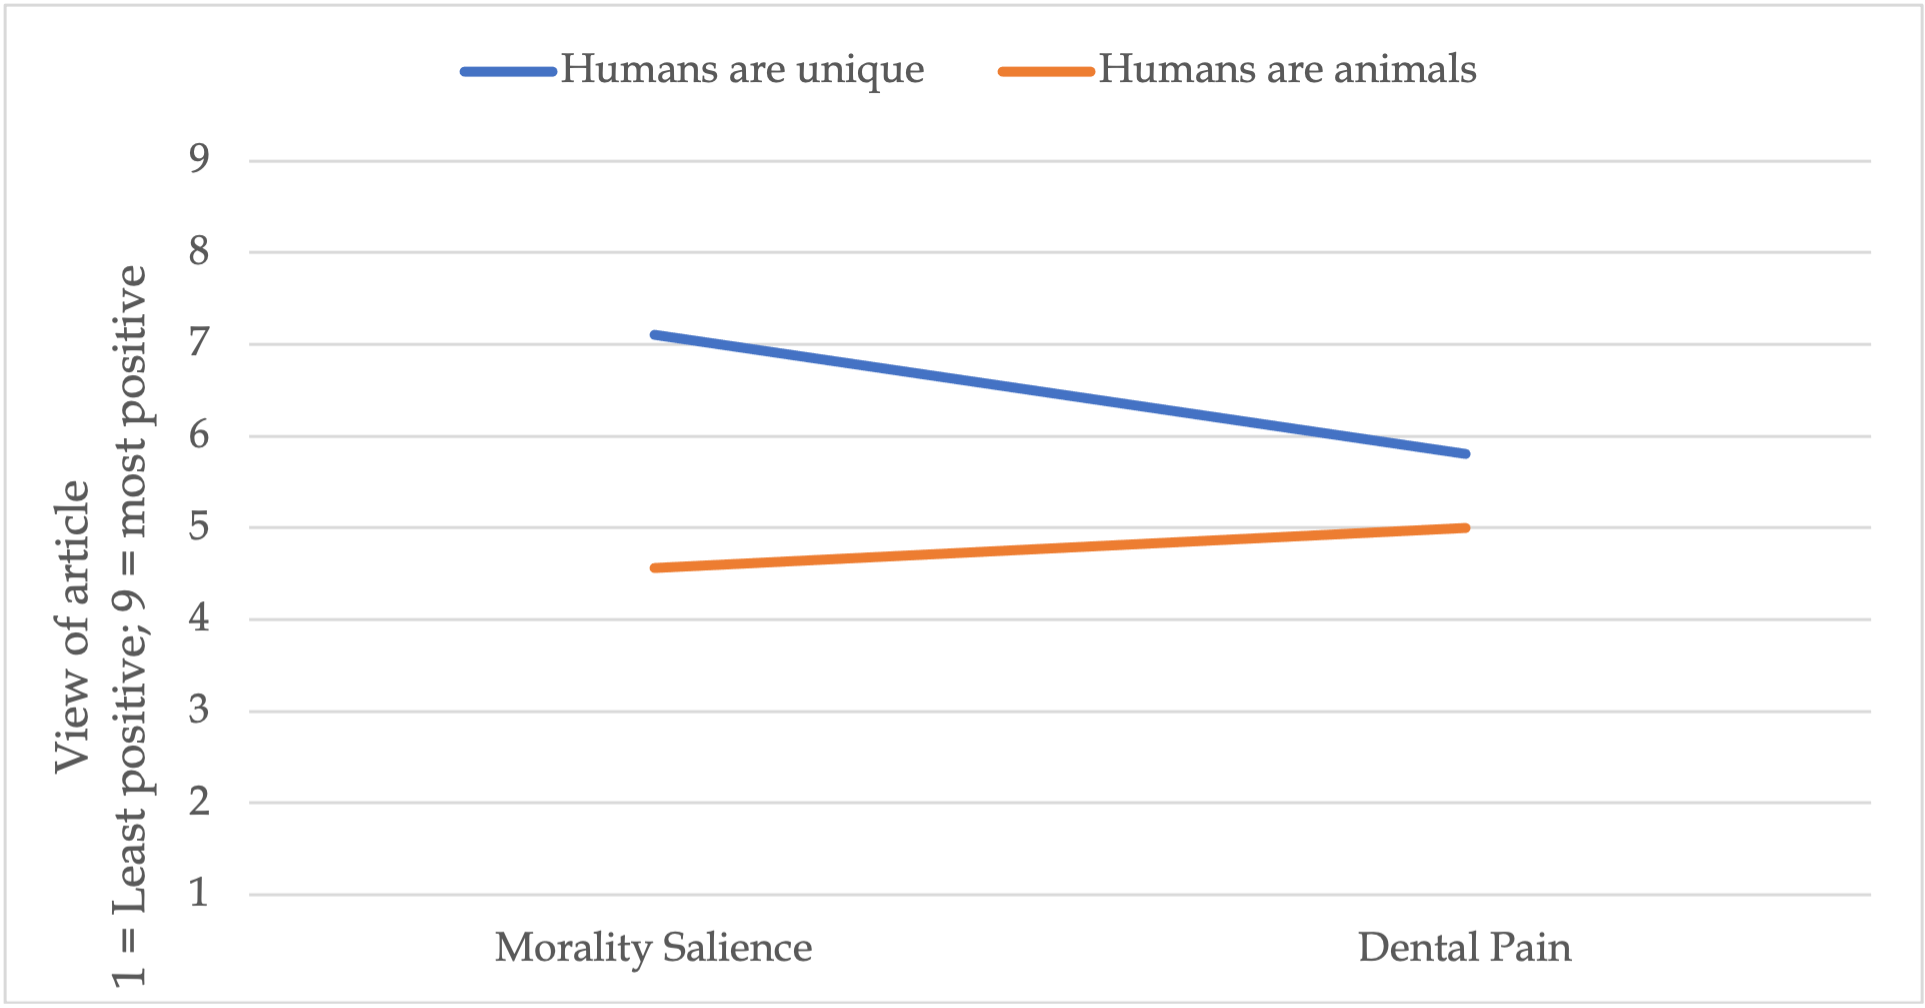 A line graph with two lines plotted. The blue line represents, Humans are unique. The orange line represents, humans are animals. the y axis measures the positivity view of the article, starting at 1, and increasing to 9 by increments of 1. As the two lines elapse over the x axis, it traverses from morality salience (left), to dental pain (right)